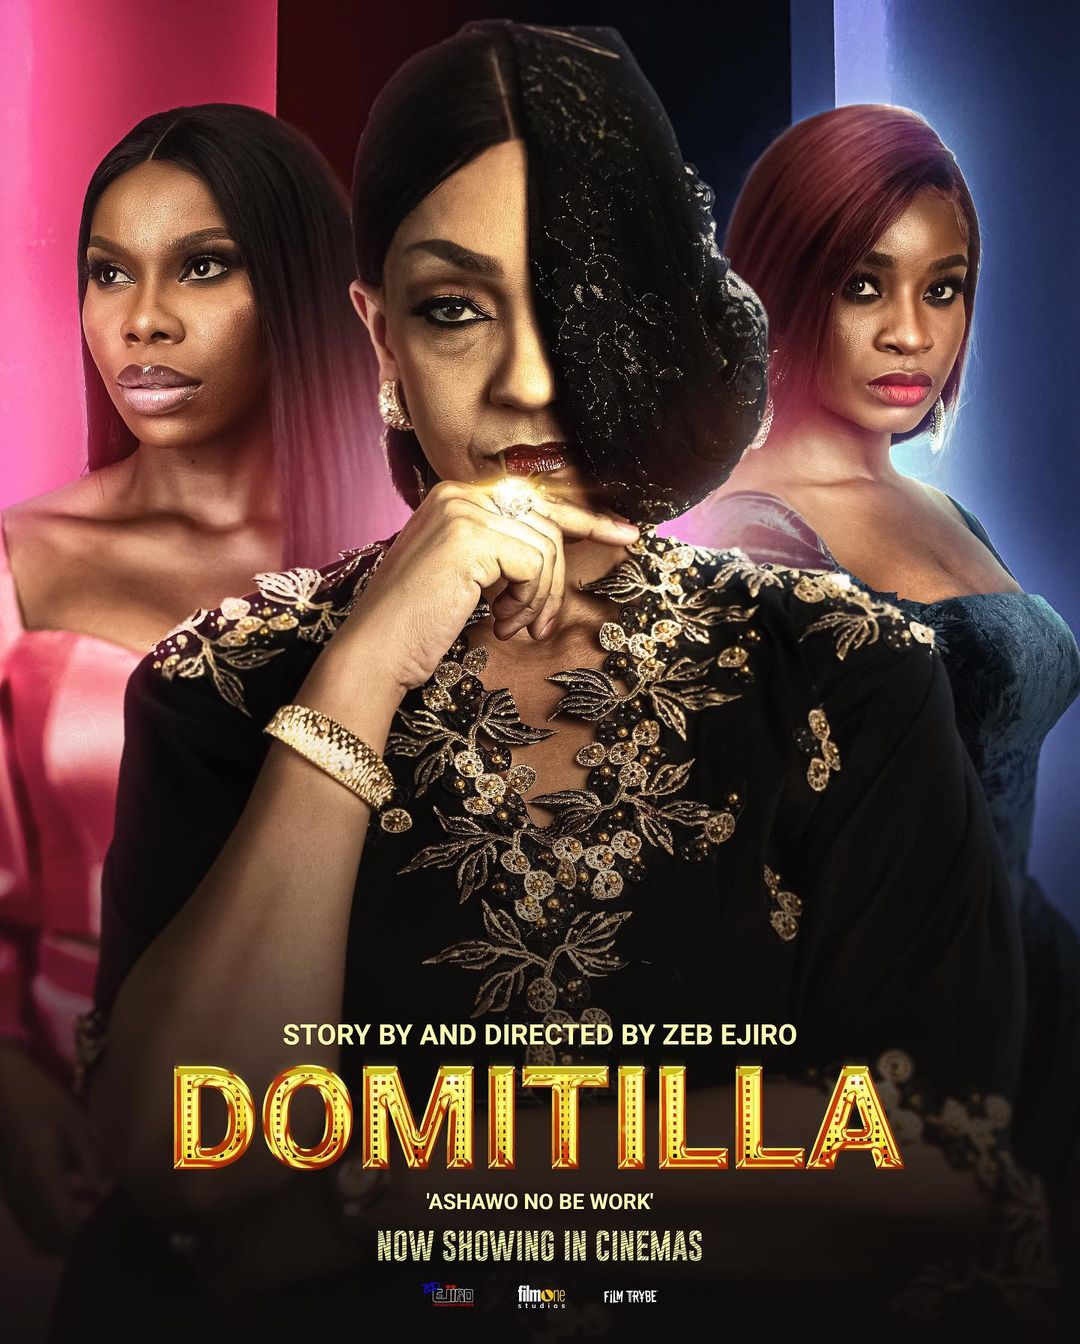 340169655 6410713965661309 6889109908405358772 n - Are Nollywood Remakes Commercially Viable - 7 Key Box Office and Streaming Data To Digest